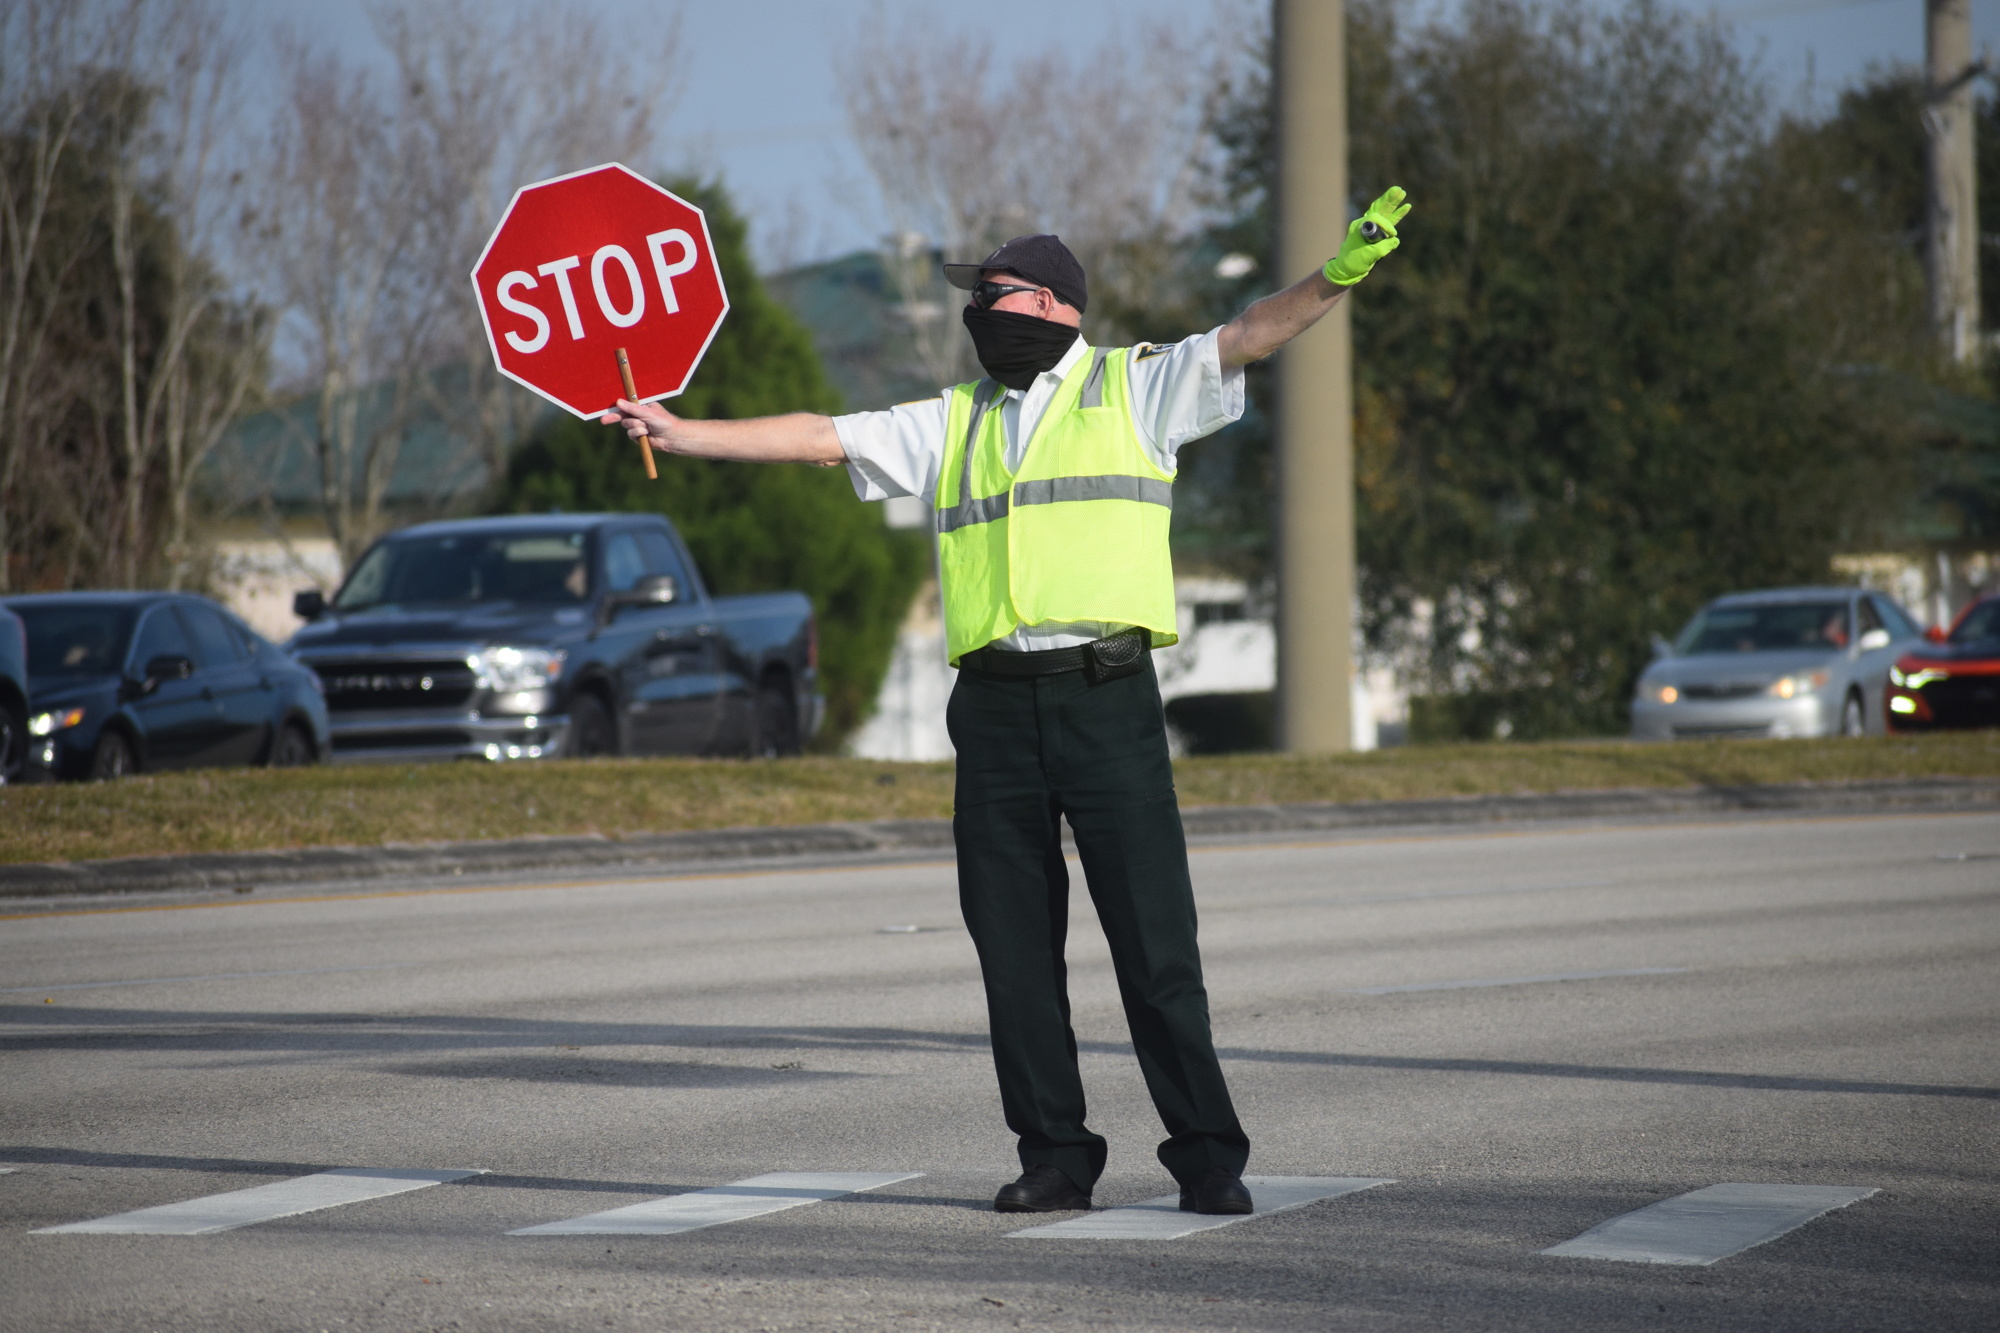 Thomas Widman, a crossing guard, holds up a stop sign to stop traffic as students make their way across State Road 70 after school.